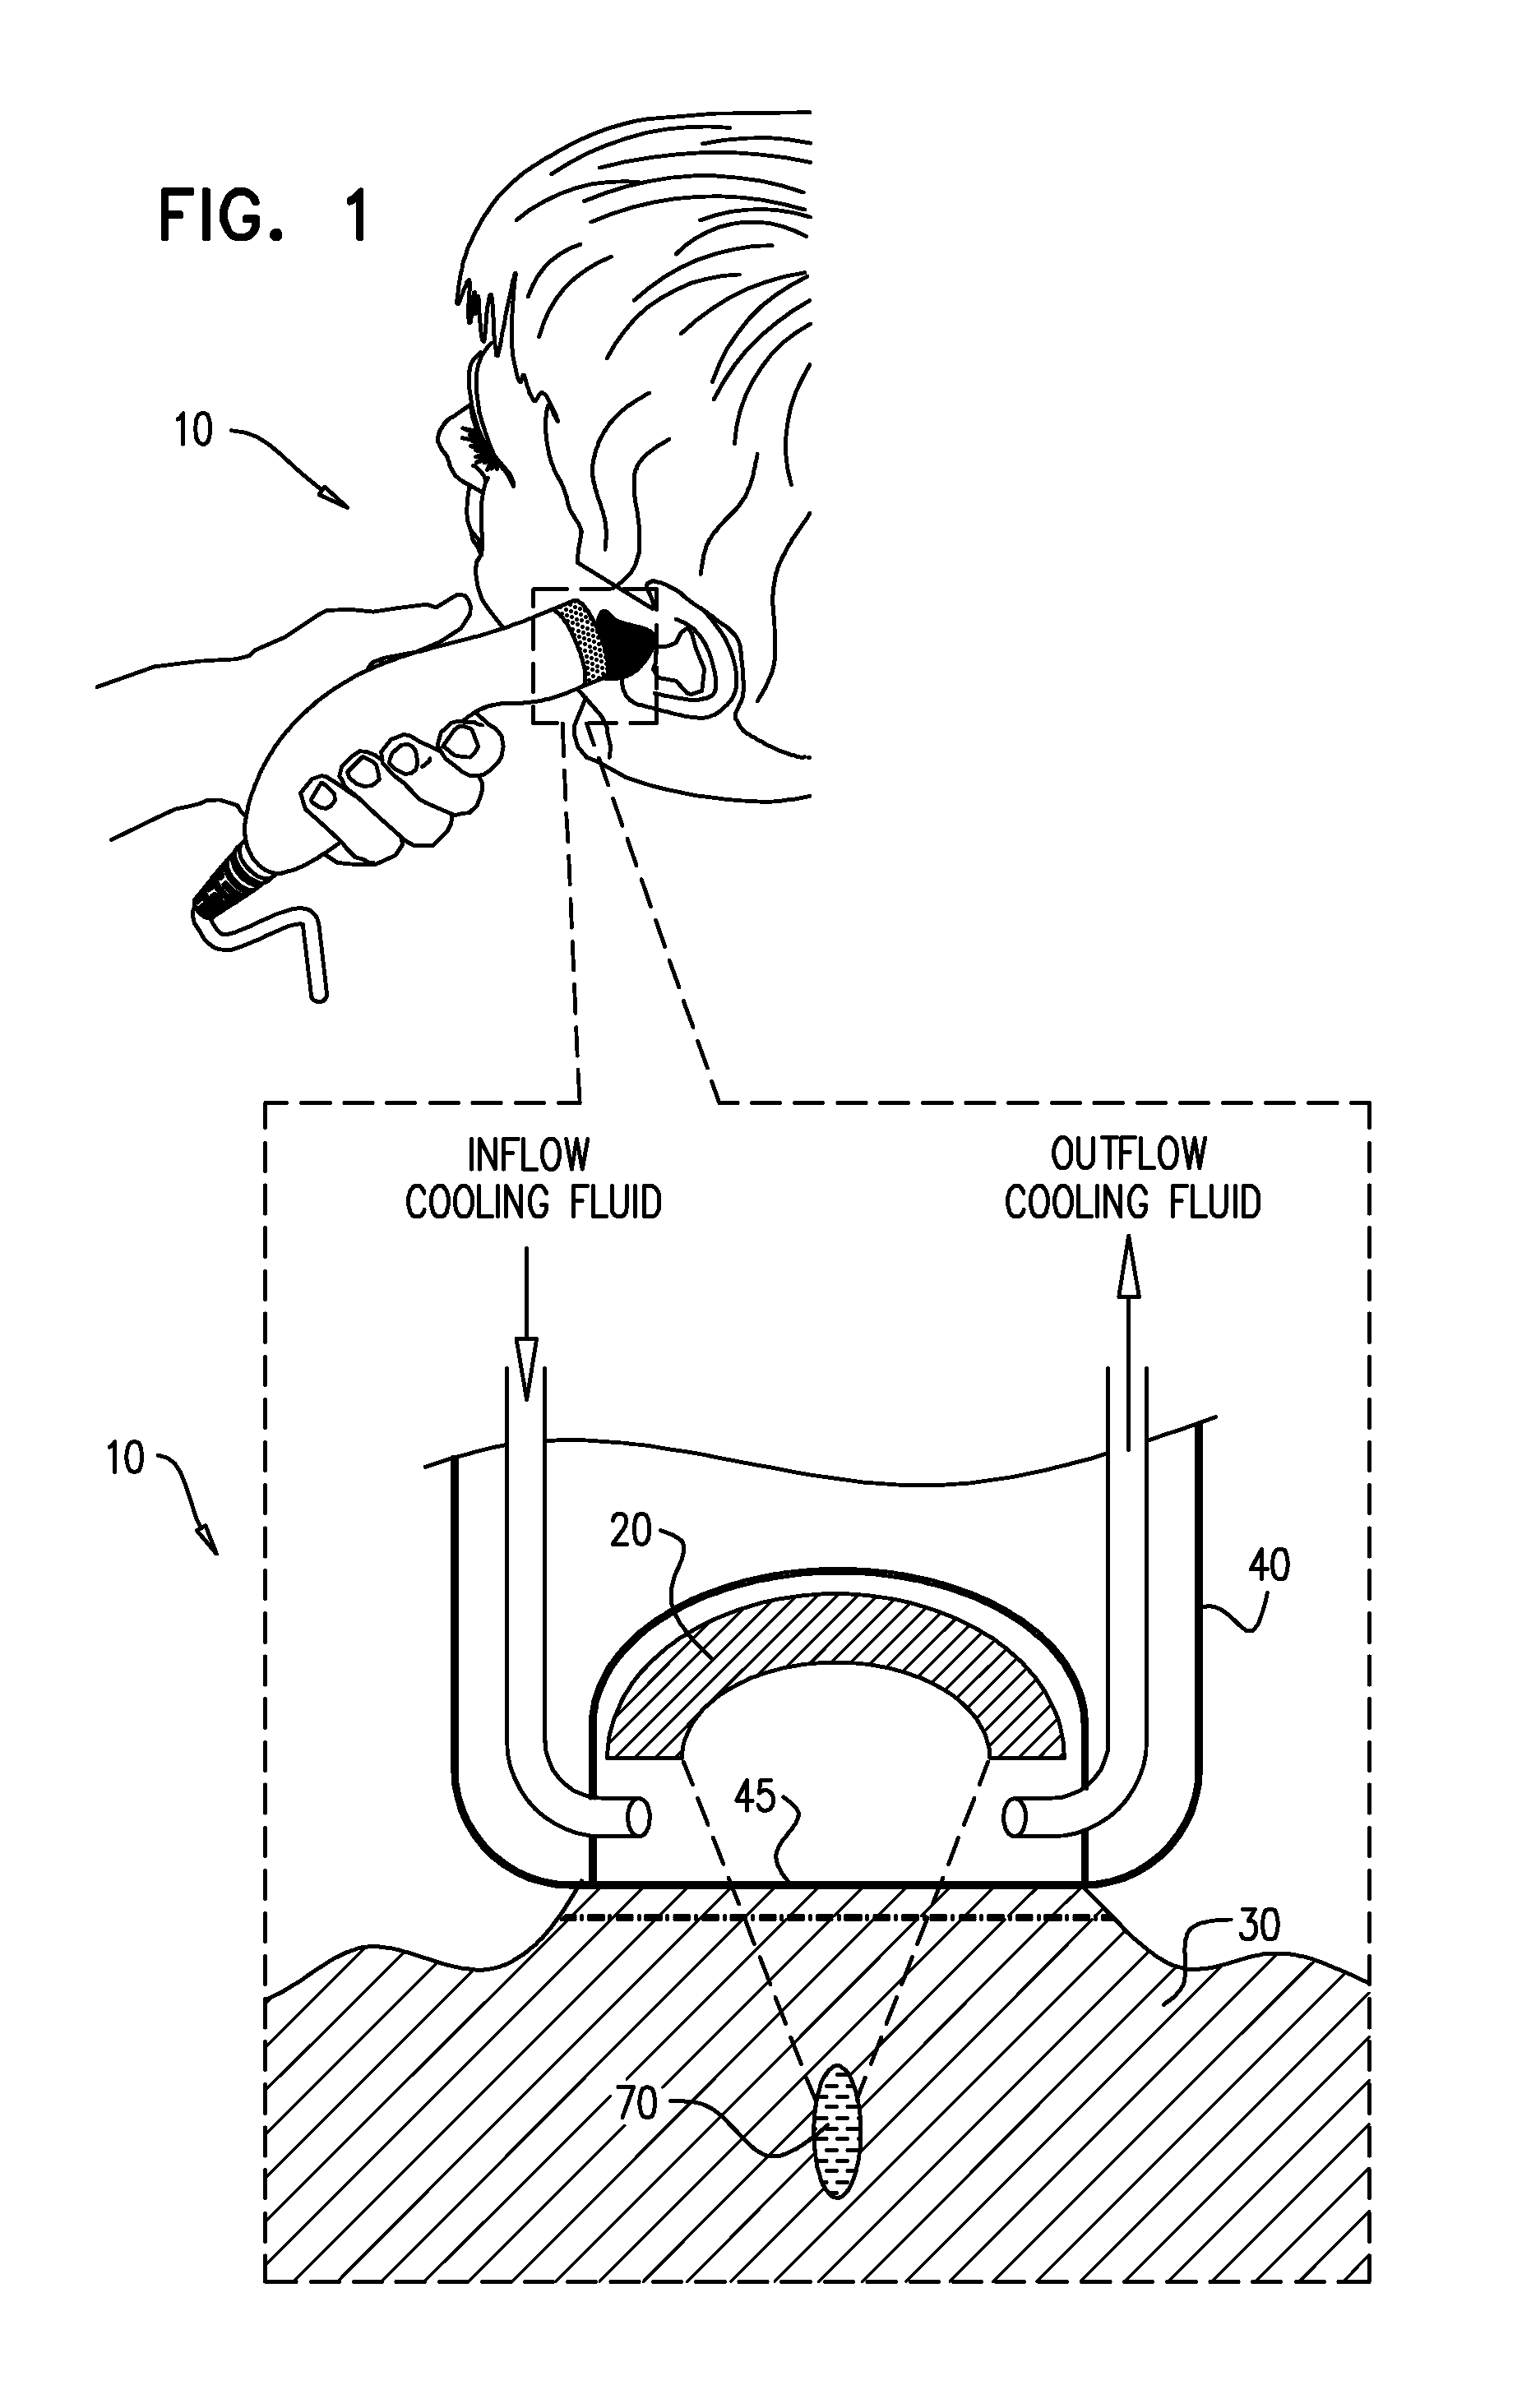 Method and device for treatment of keloids and hypertrophic scars using focused ultrasound